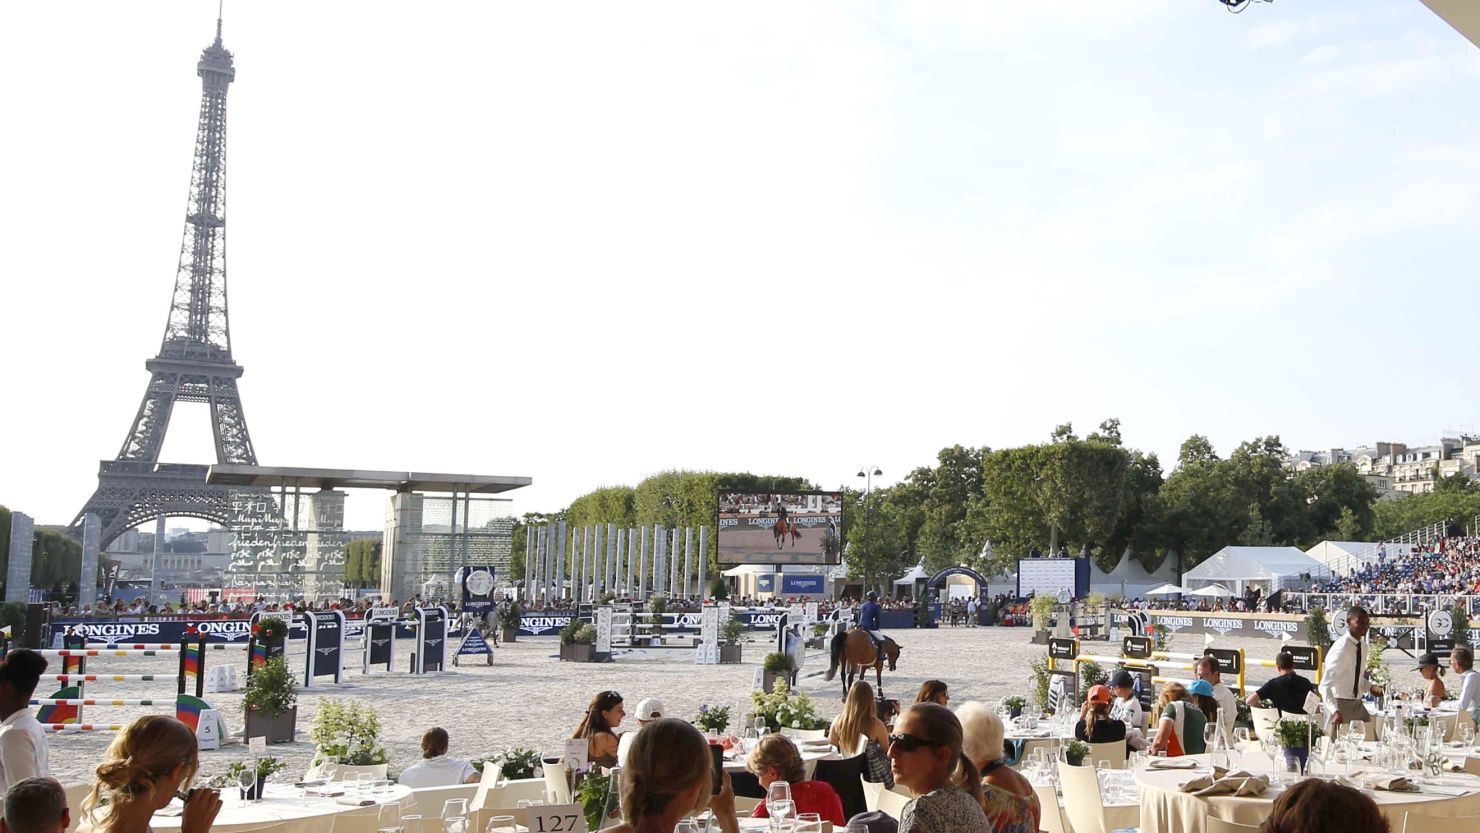 Paris will host the 11th stop of the Longines Global Champions Tour.